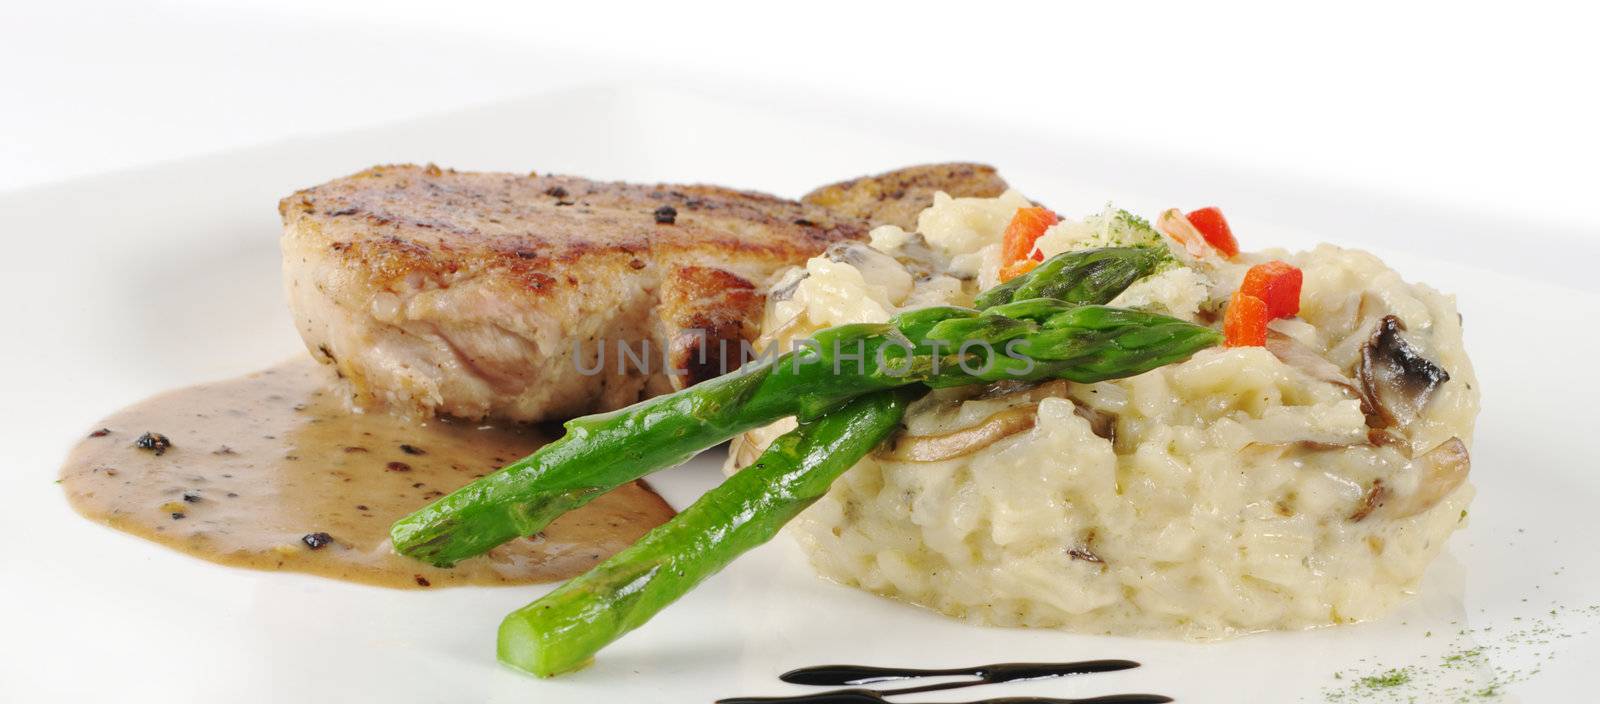 Risotto, Asparagus and Meat  by ildi